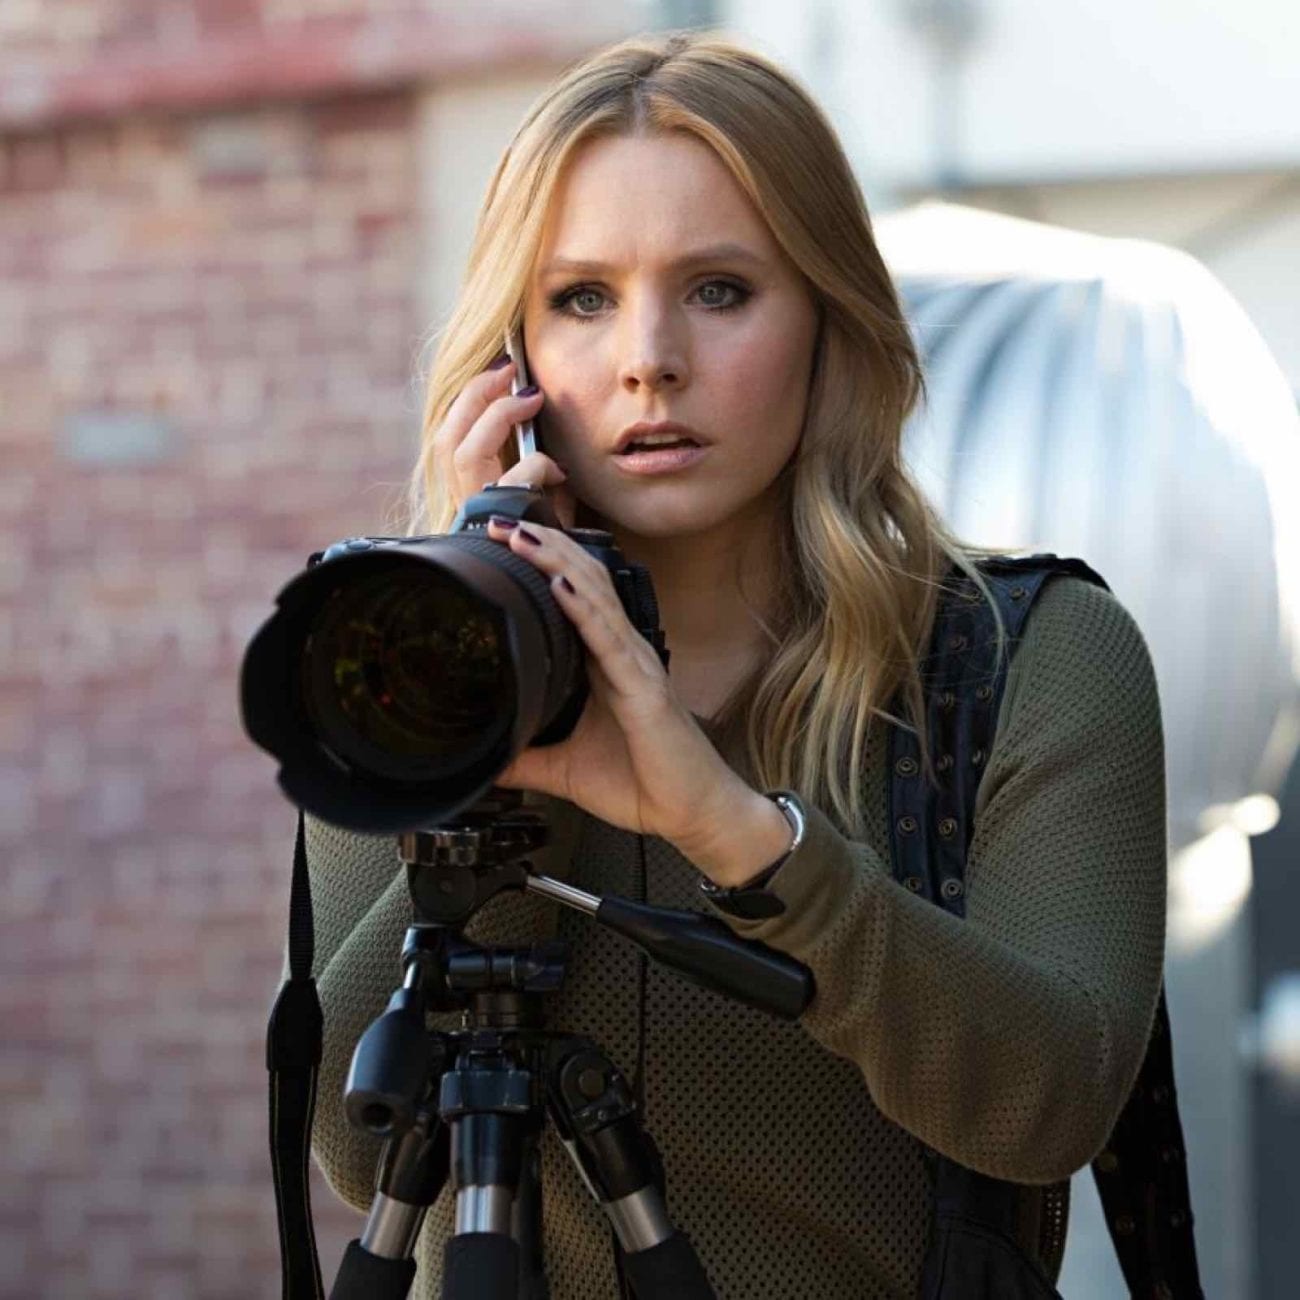 Seems the writers forgot exactly why 'Veronica Mars' was so special. Here’s why, in fans’ words, 'Veronica Mars' S4 is a major disappointment.